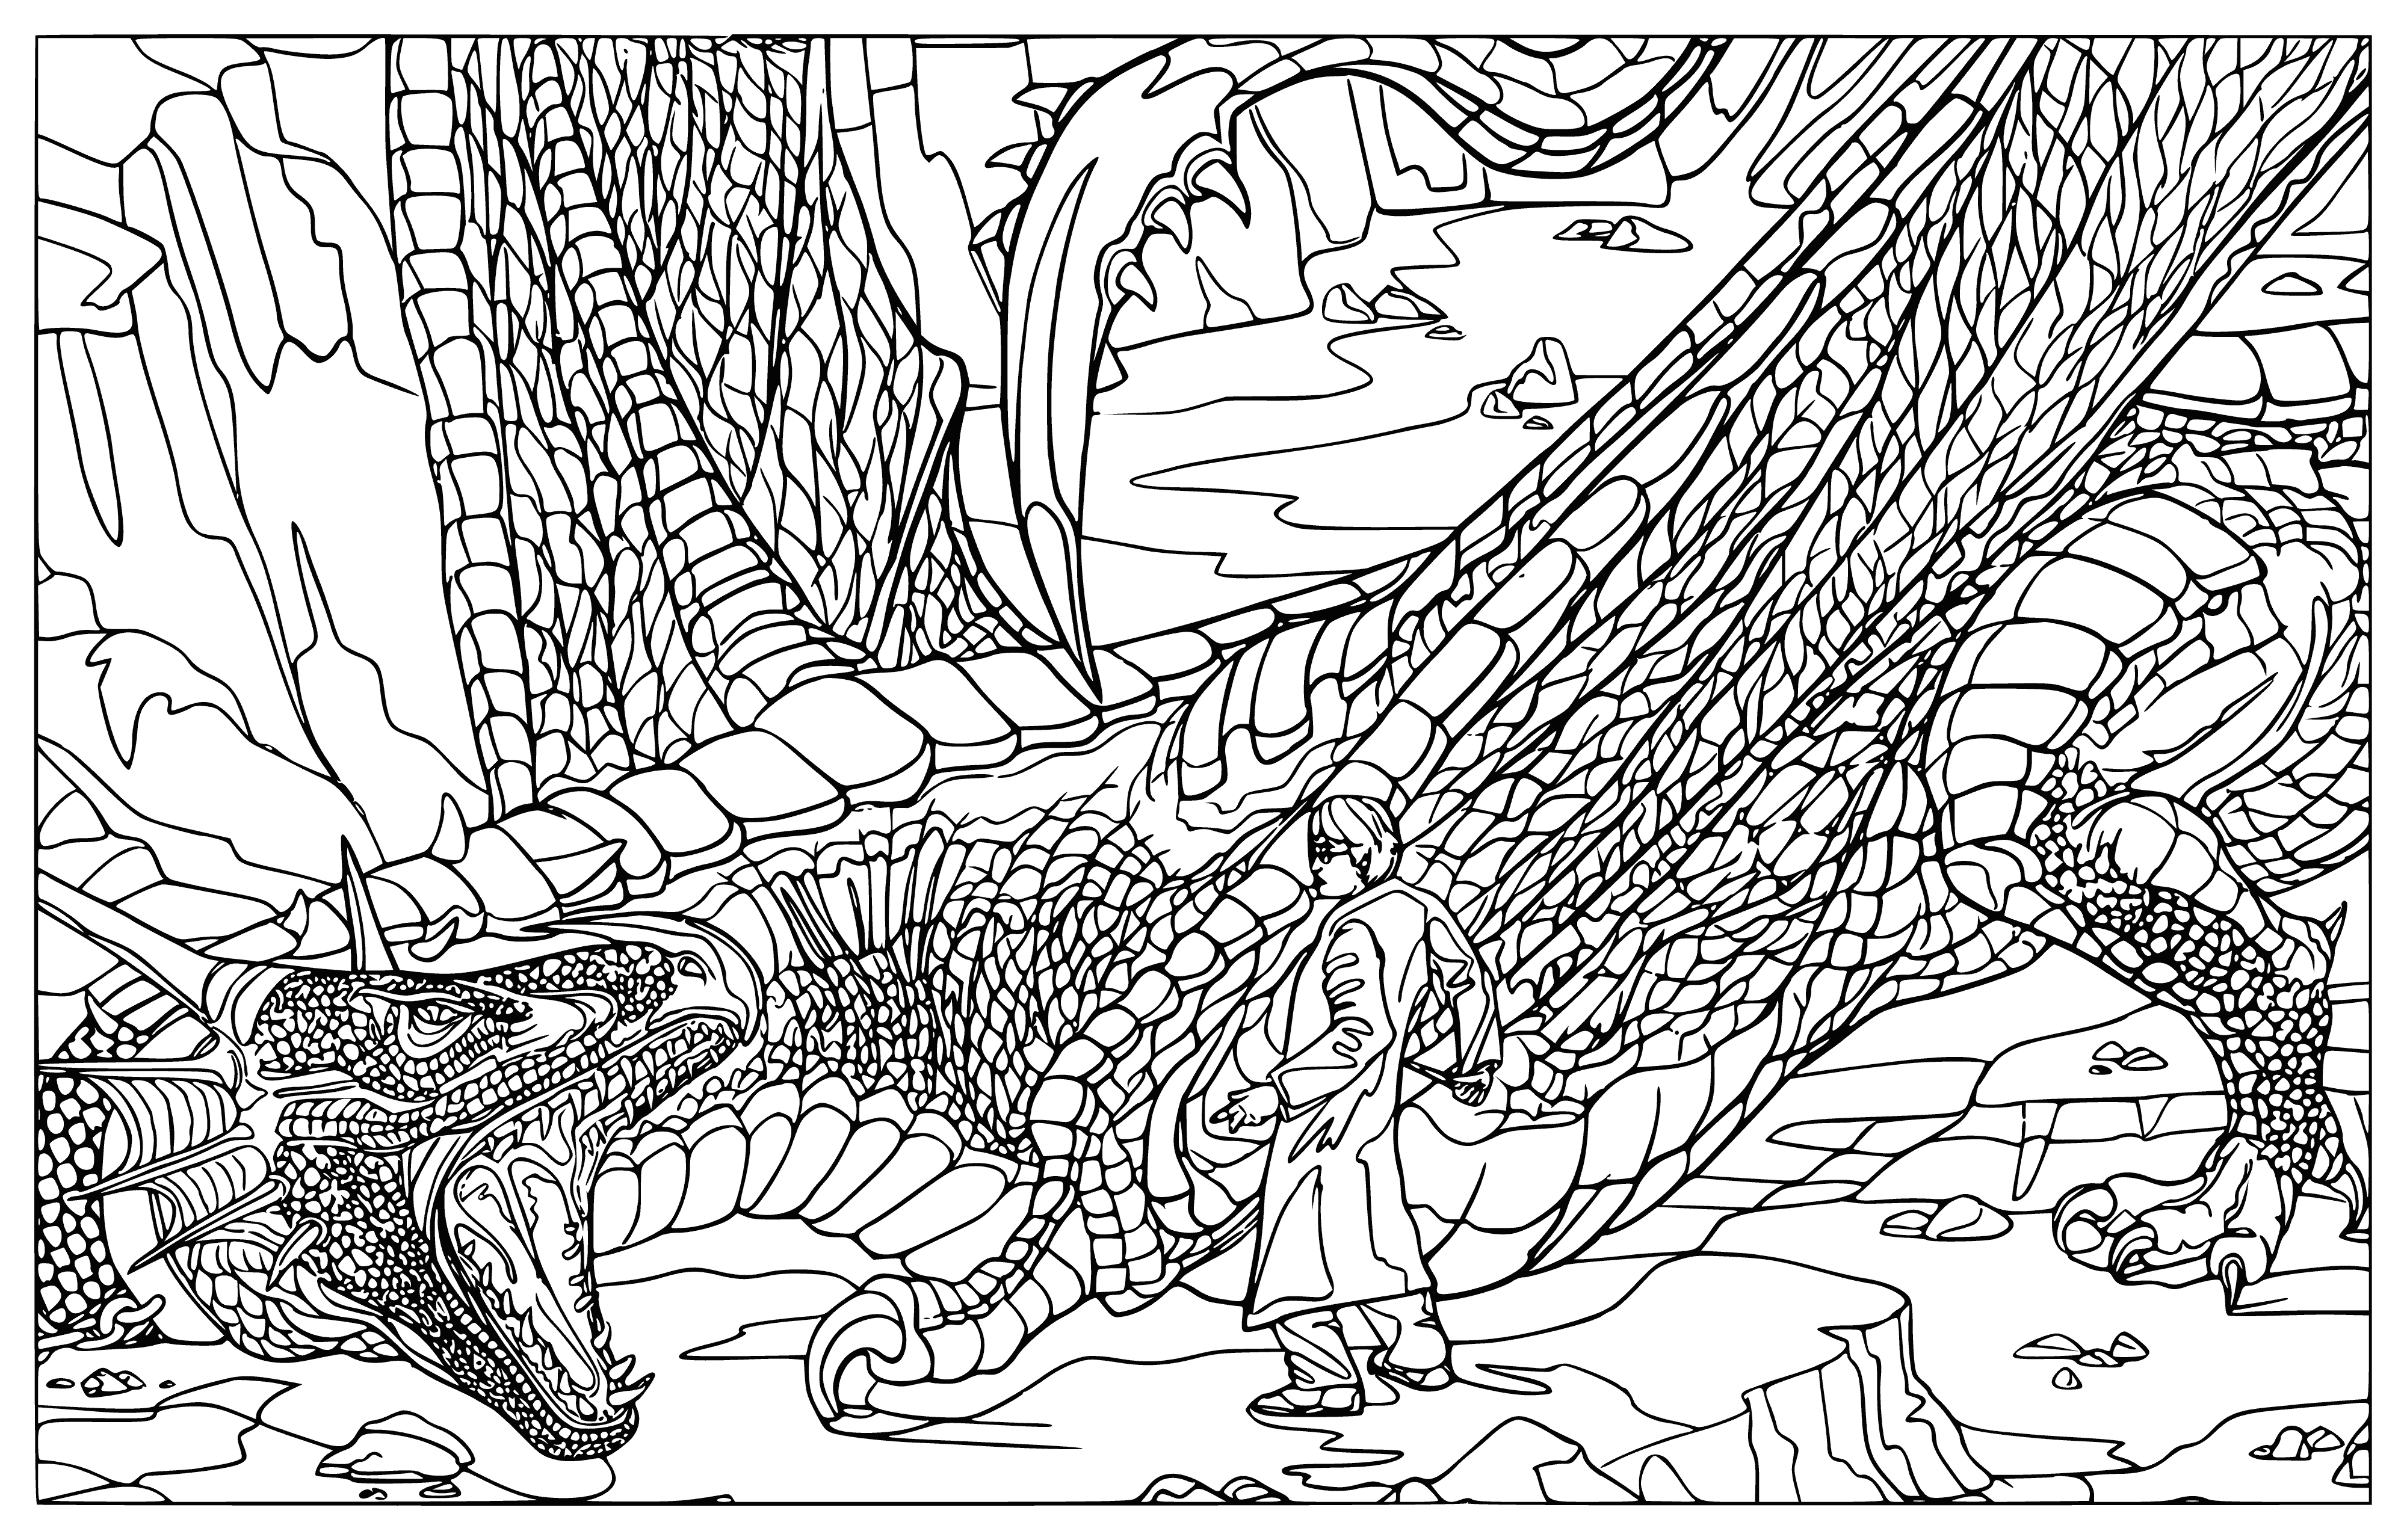 coloring page: Harry and dragon battle – both Blast-Ended Skrewts. Red dragon vs. wand-wielding Harry.